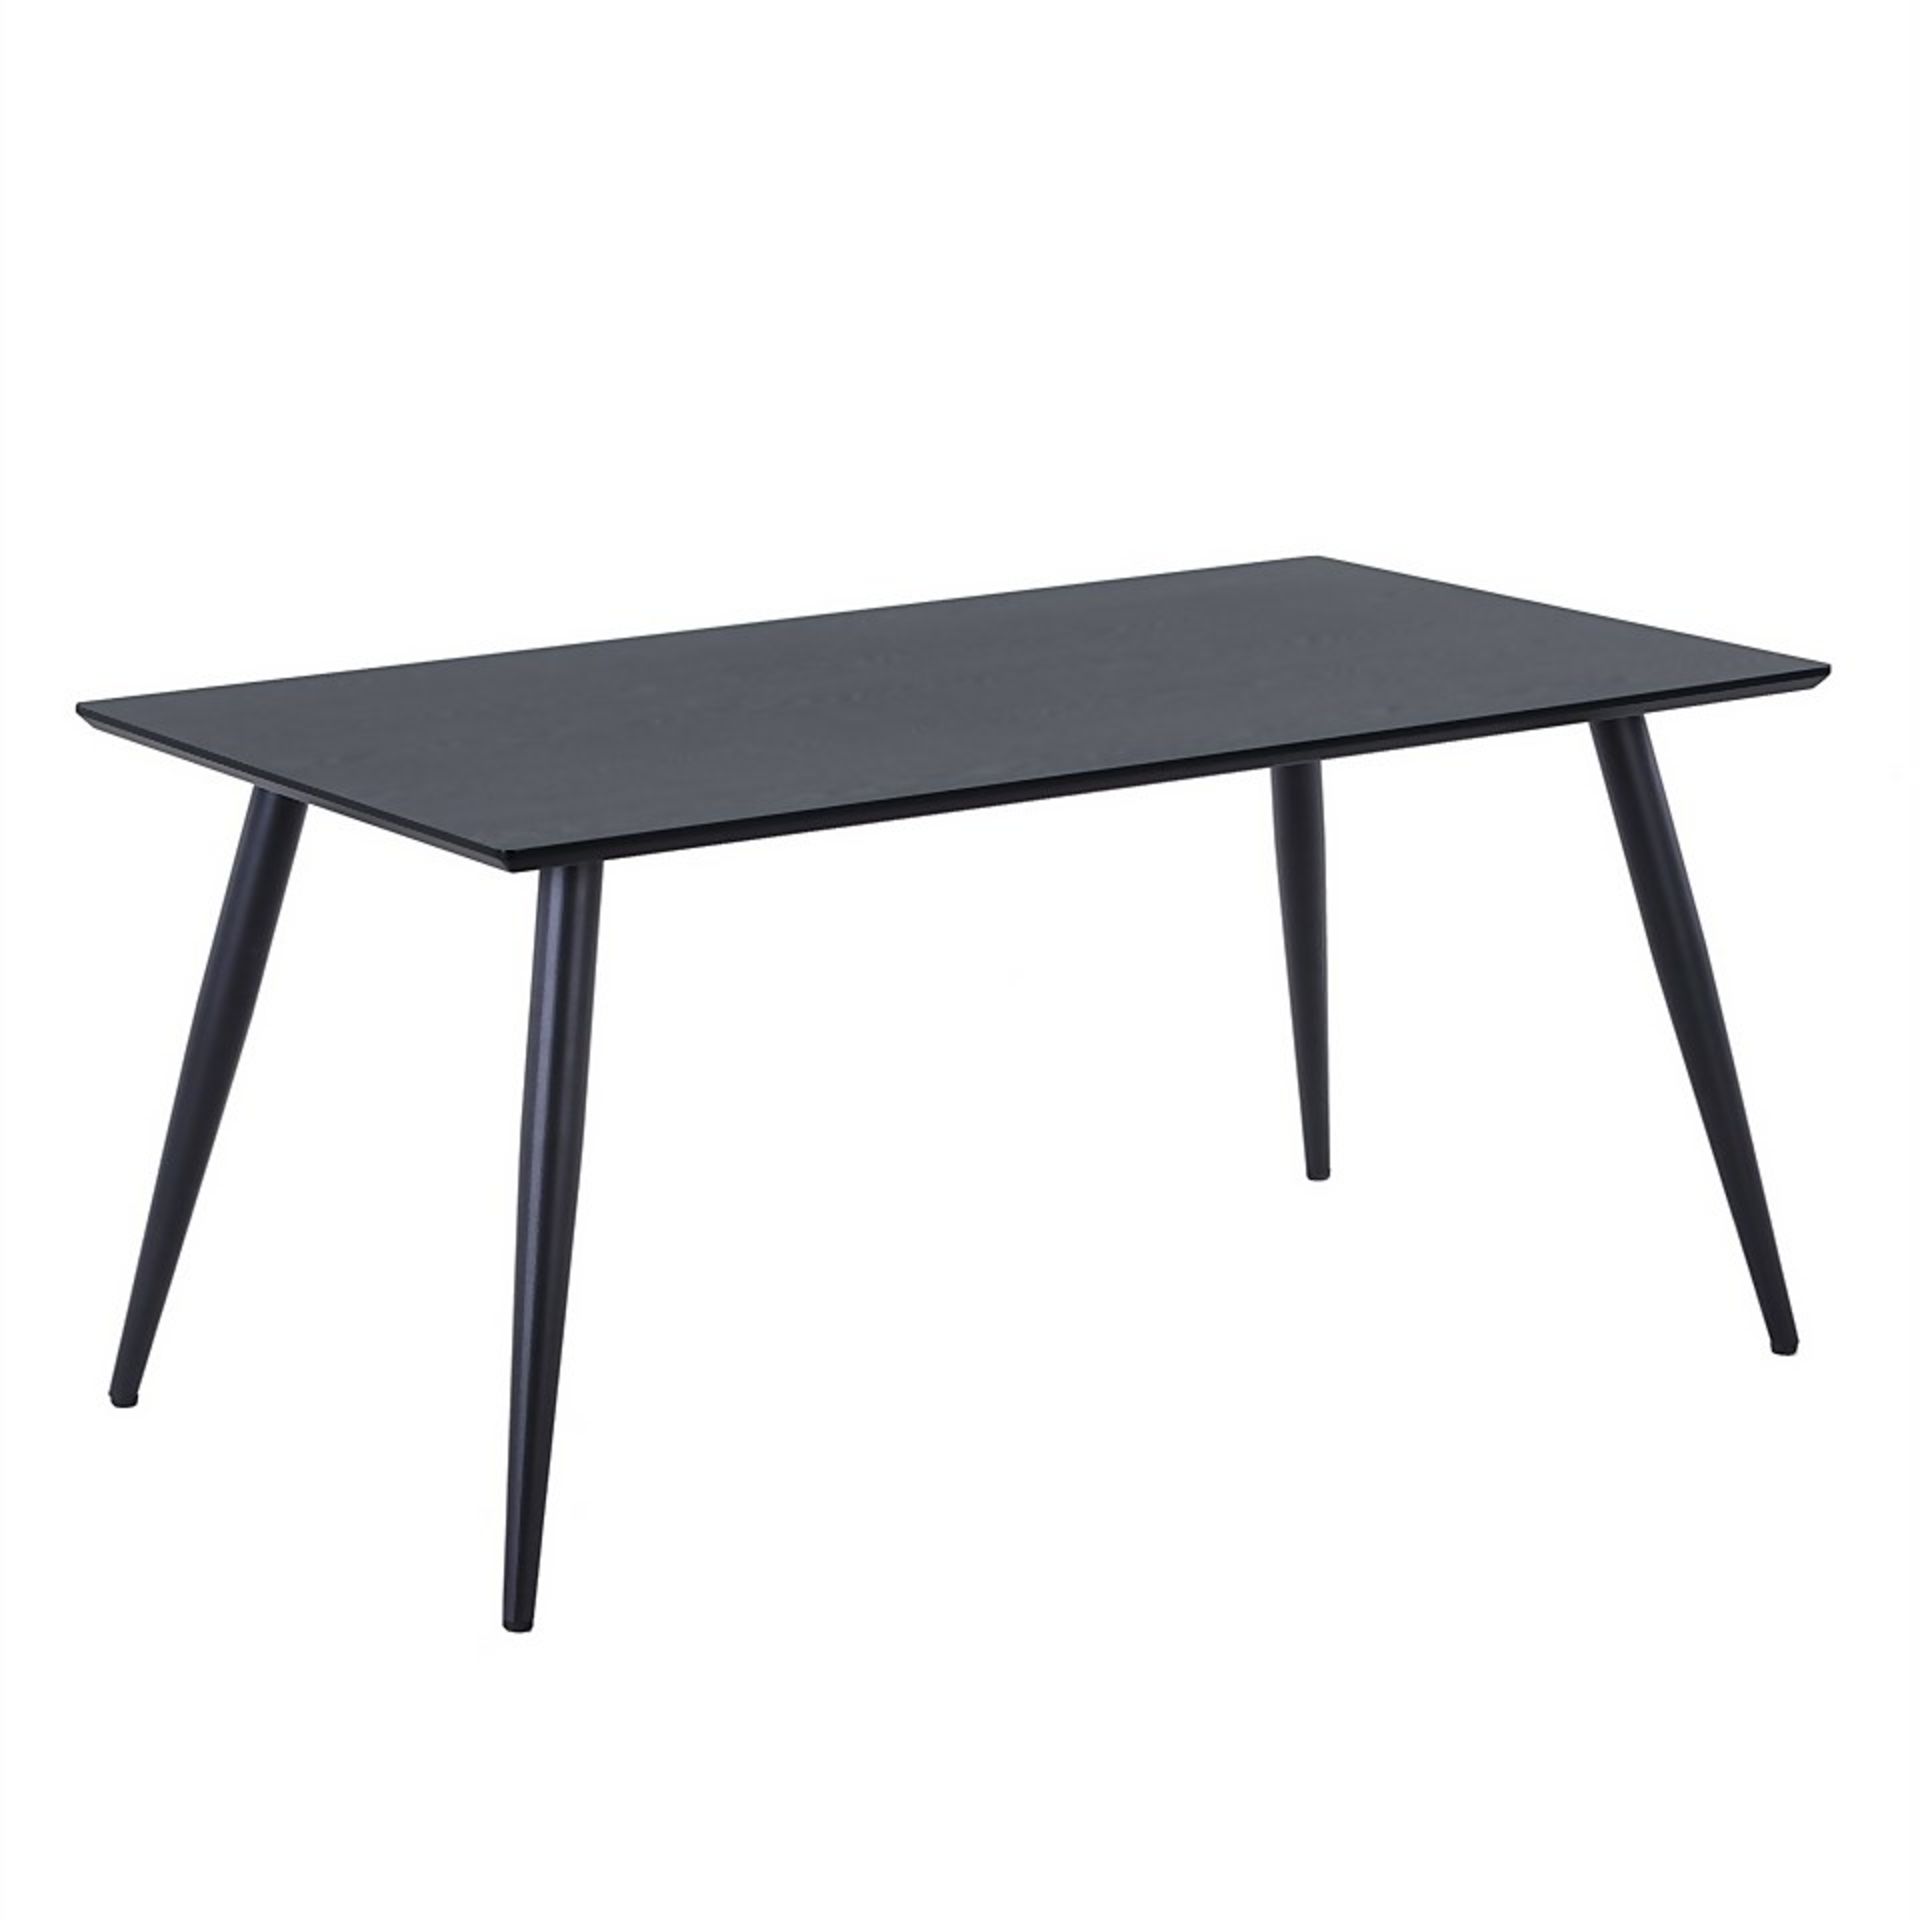 (R7D) 2 X Illona Dining Table (Box 1 Of 2 – Contains Table Top Panel) ). Ash Veneer Table Top. Blac - Image 2 of 5